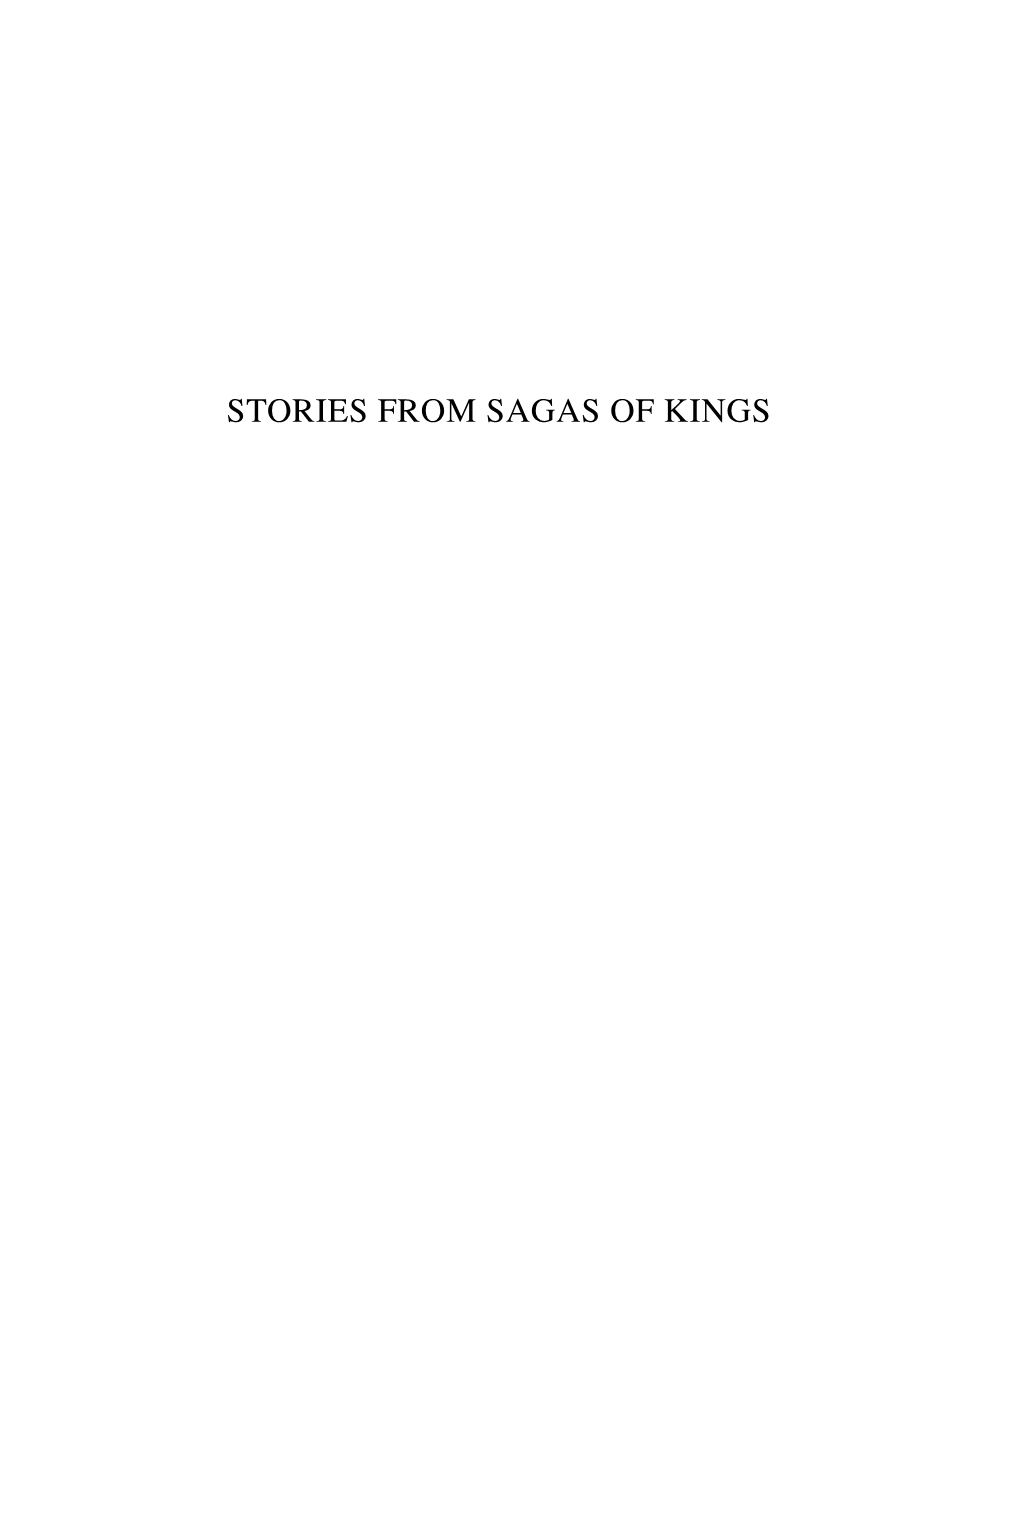 Stories from Sagas of Kings